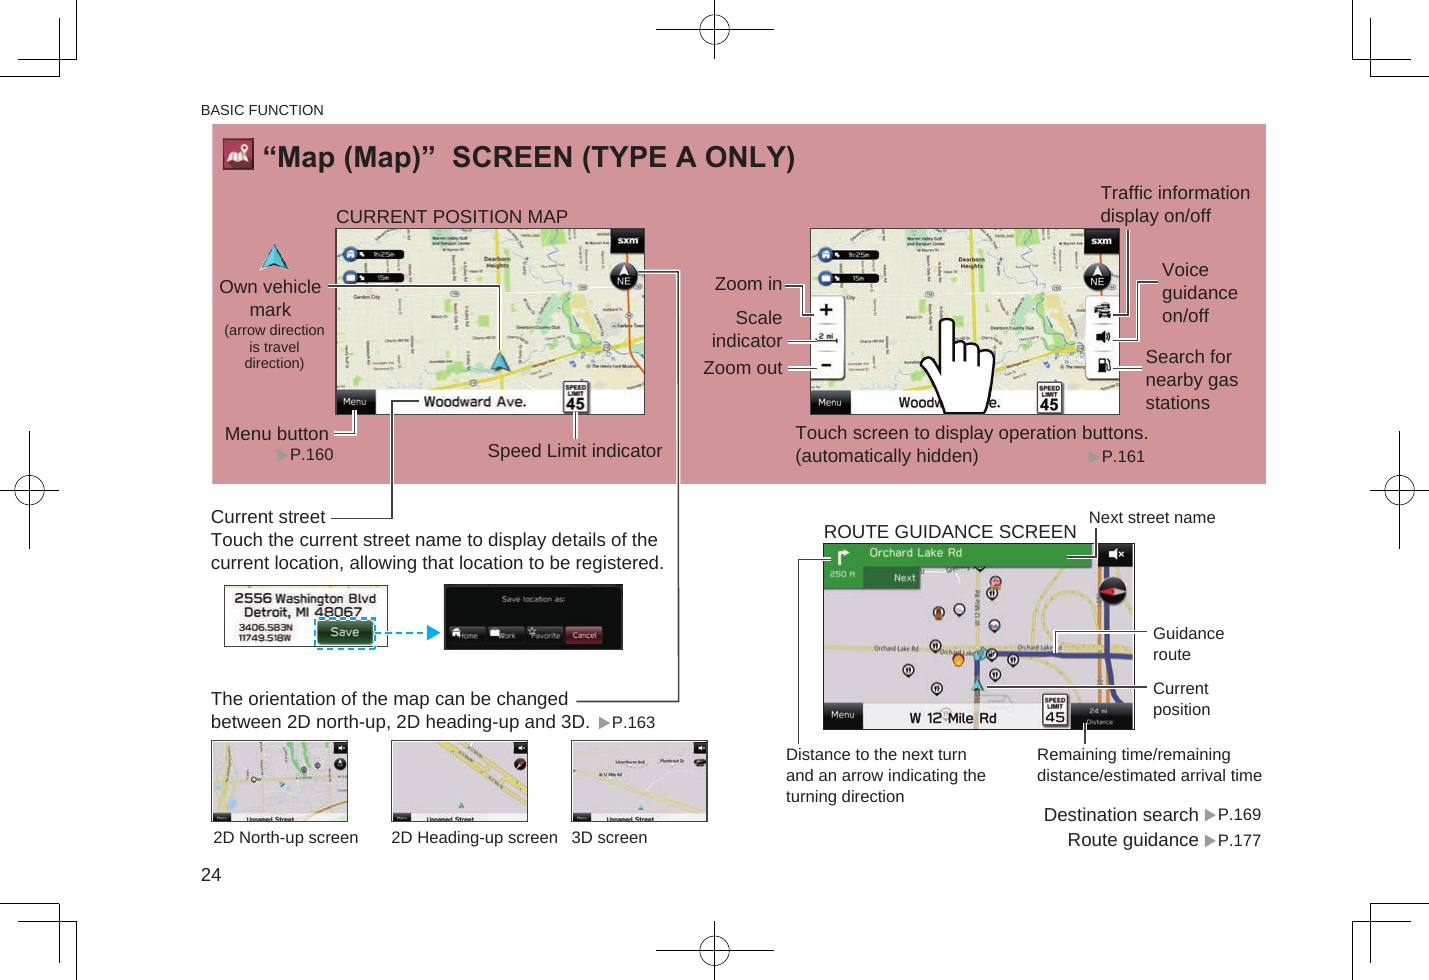 “Map (Map)”  SCREEN (TYPE A ONLY)P.160 P.161Touch screen to display operation buttons.(automatically hidden)(arrow direction is travel direction)Own vehicle mark Menu buttonCurrent streetDestination search P.169Route guidance P.177Next street nameDistance to the next turn and an arrow indicating the turning directionScale indicatorZoom inThe orientation of the map can be changed between 2D north-up, 2D heading-up and 3D.Touch the current street name to display details of the current location, allowing that location to be registered.P.1632D North-up screen 2D Heading-up screen 3D screenZoom outVoice guidance on/offTraffic information display on/offSearch for nearby gas stationsRemaining time/remaining distance/estimated arrival timeGuidance routeCurrent positionSpeed Limit indicatorCURRENT POSITION MAPROUTE GUIDANCE SCREENThe screen display automatically changes to display travel lanes at expressway junctions, etc.Search for your destination. - Select your destination.-Select the route. - Route guidance starts.Display the destination search menu. -Destinations can also be searched from POIs or previously set destinations.A search is performed and results displayed for the fastest, shortest, and most economic routes.By registering your home beforehand, it can easily be set as the destination.Destinations can also be set directly from the Map screen.P.177P.170P.174P.171, 172JUNCTION SCREENRETURNING HOMESearches are possible with a variety of words such as addresses, facility names, and intersection names.Destinations matching the search words are displayed in a list.The travel route is displayed, and voice guidance starts.Search candidates are displayed. (Search results are predicted and candidates displayed even if only partial search words are known)Setting up home P.31Setting home as the destination P.169- Operation Flow: Guiding the Route - BASIC FUNCTION24